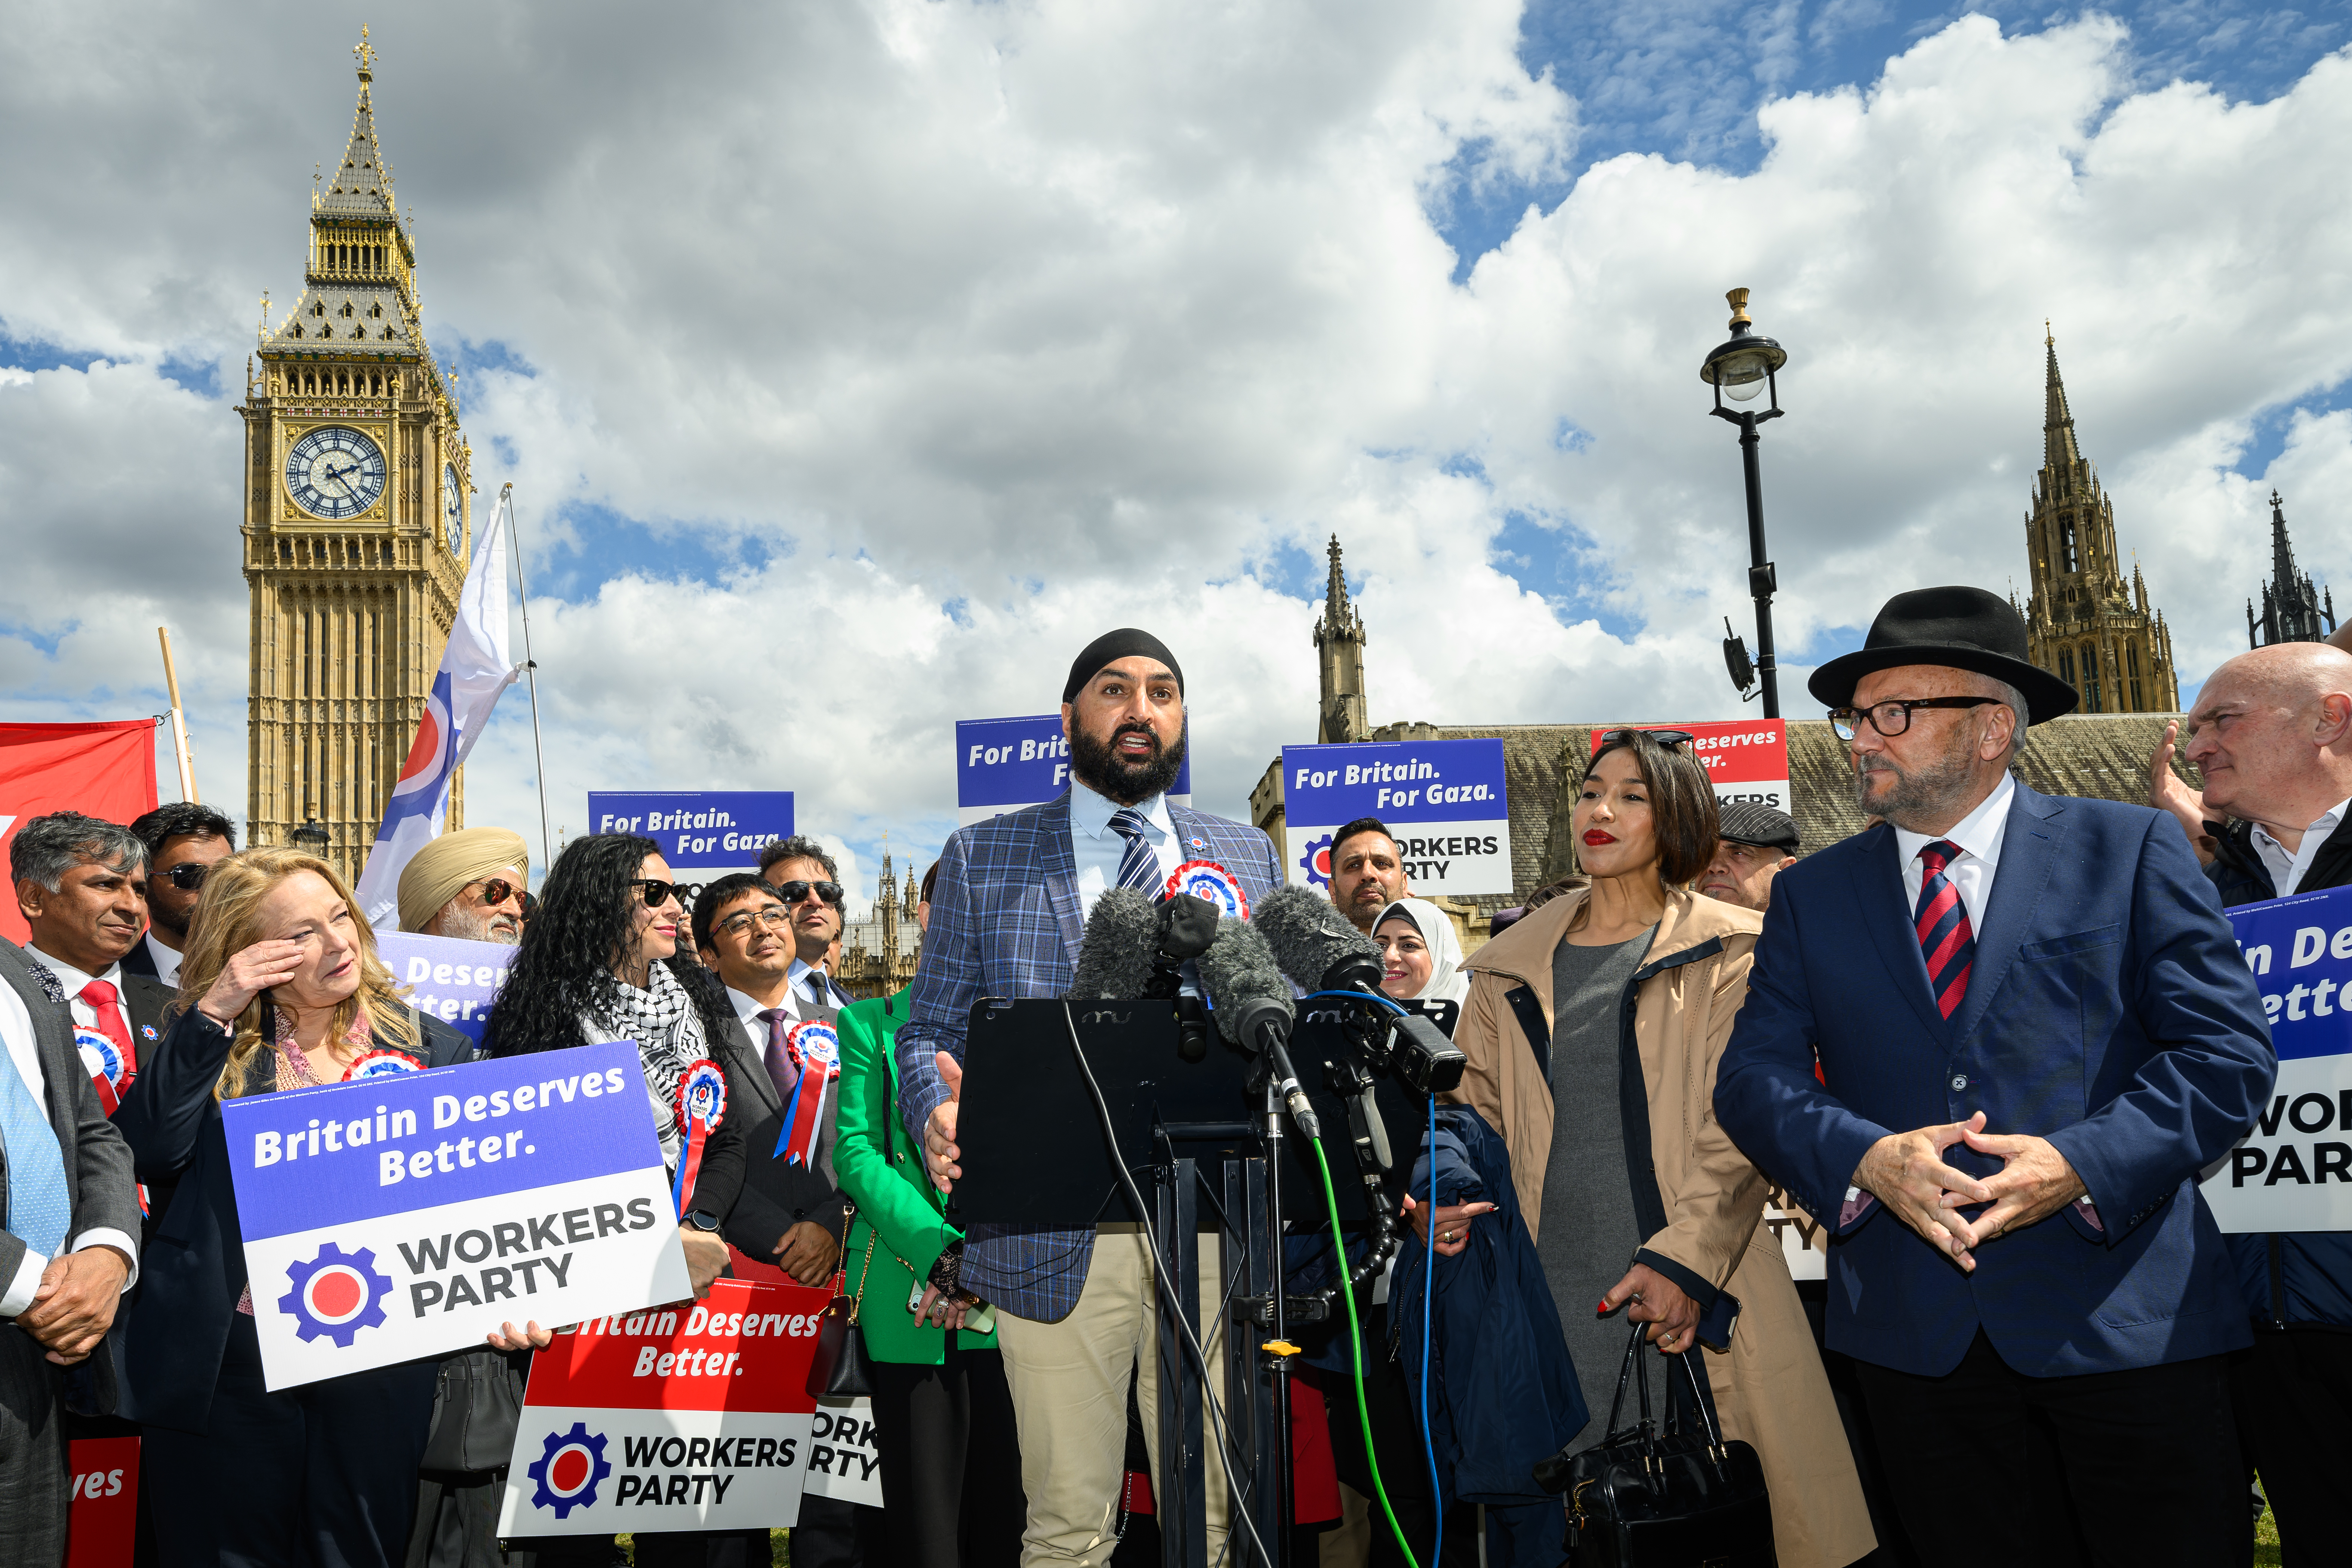 The former England cricketer spoke at a press conference in Westminster alongside party chief and far-left agitator George Galloway